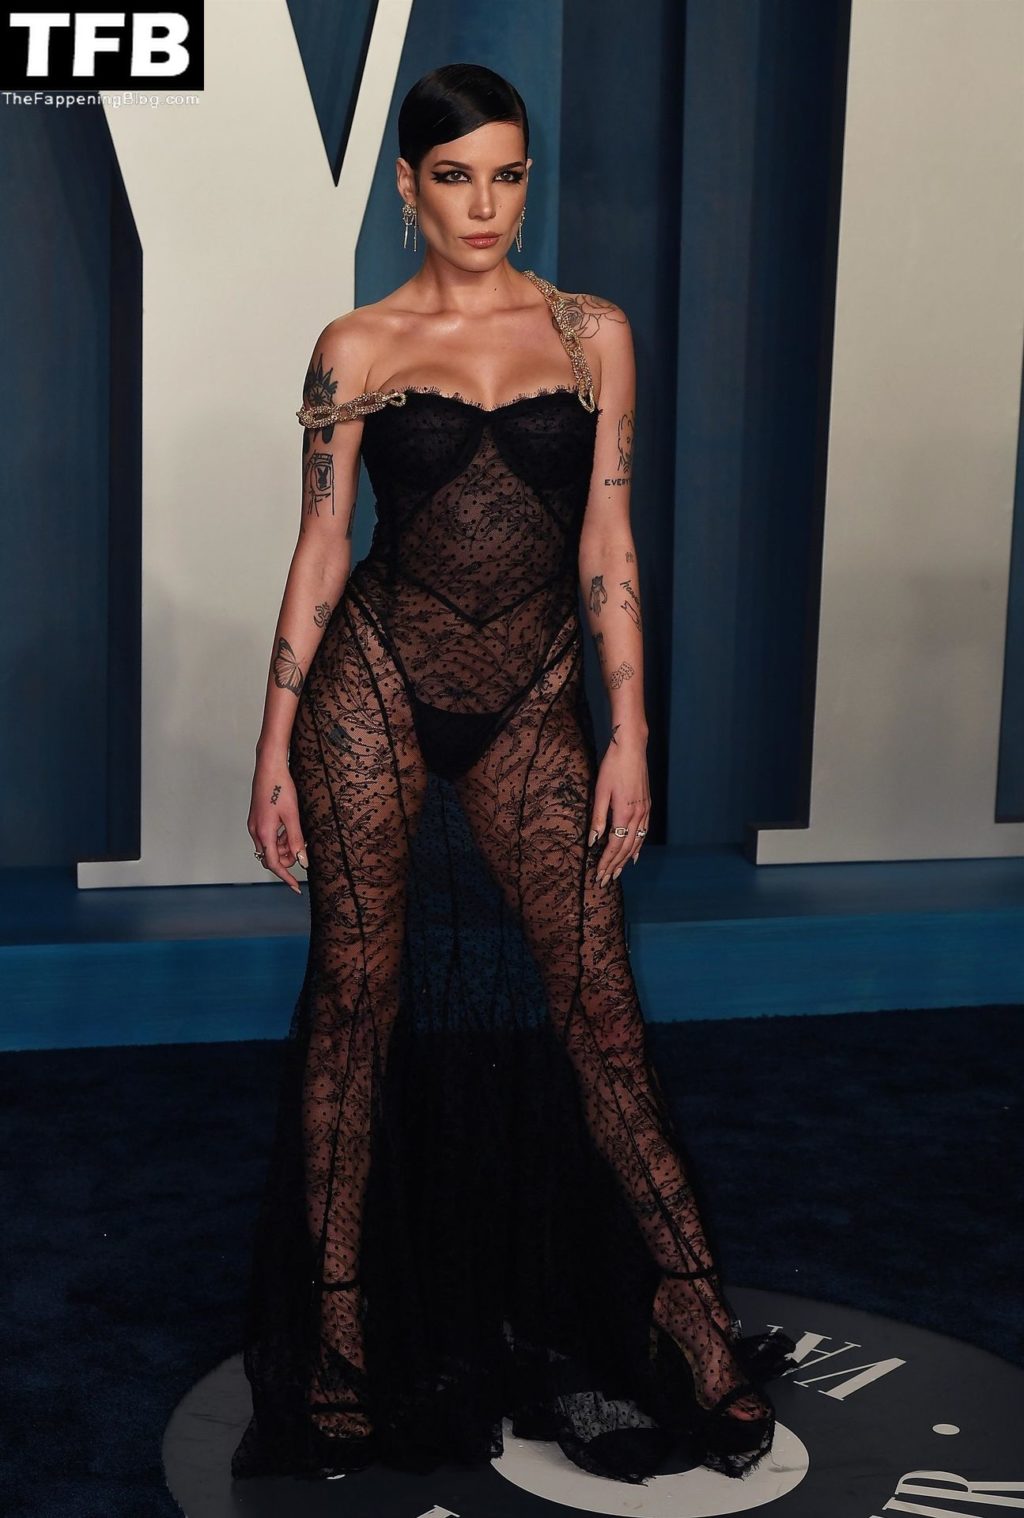 Halsey Sexy The Fappening Blog 7 2 1024x1518 - Halsey Looks Hot in a See-Through Dress at the 2022 Vanity Fair Oscar Party (11 Photos)